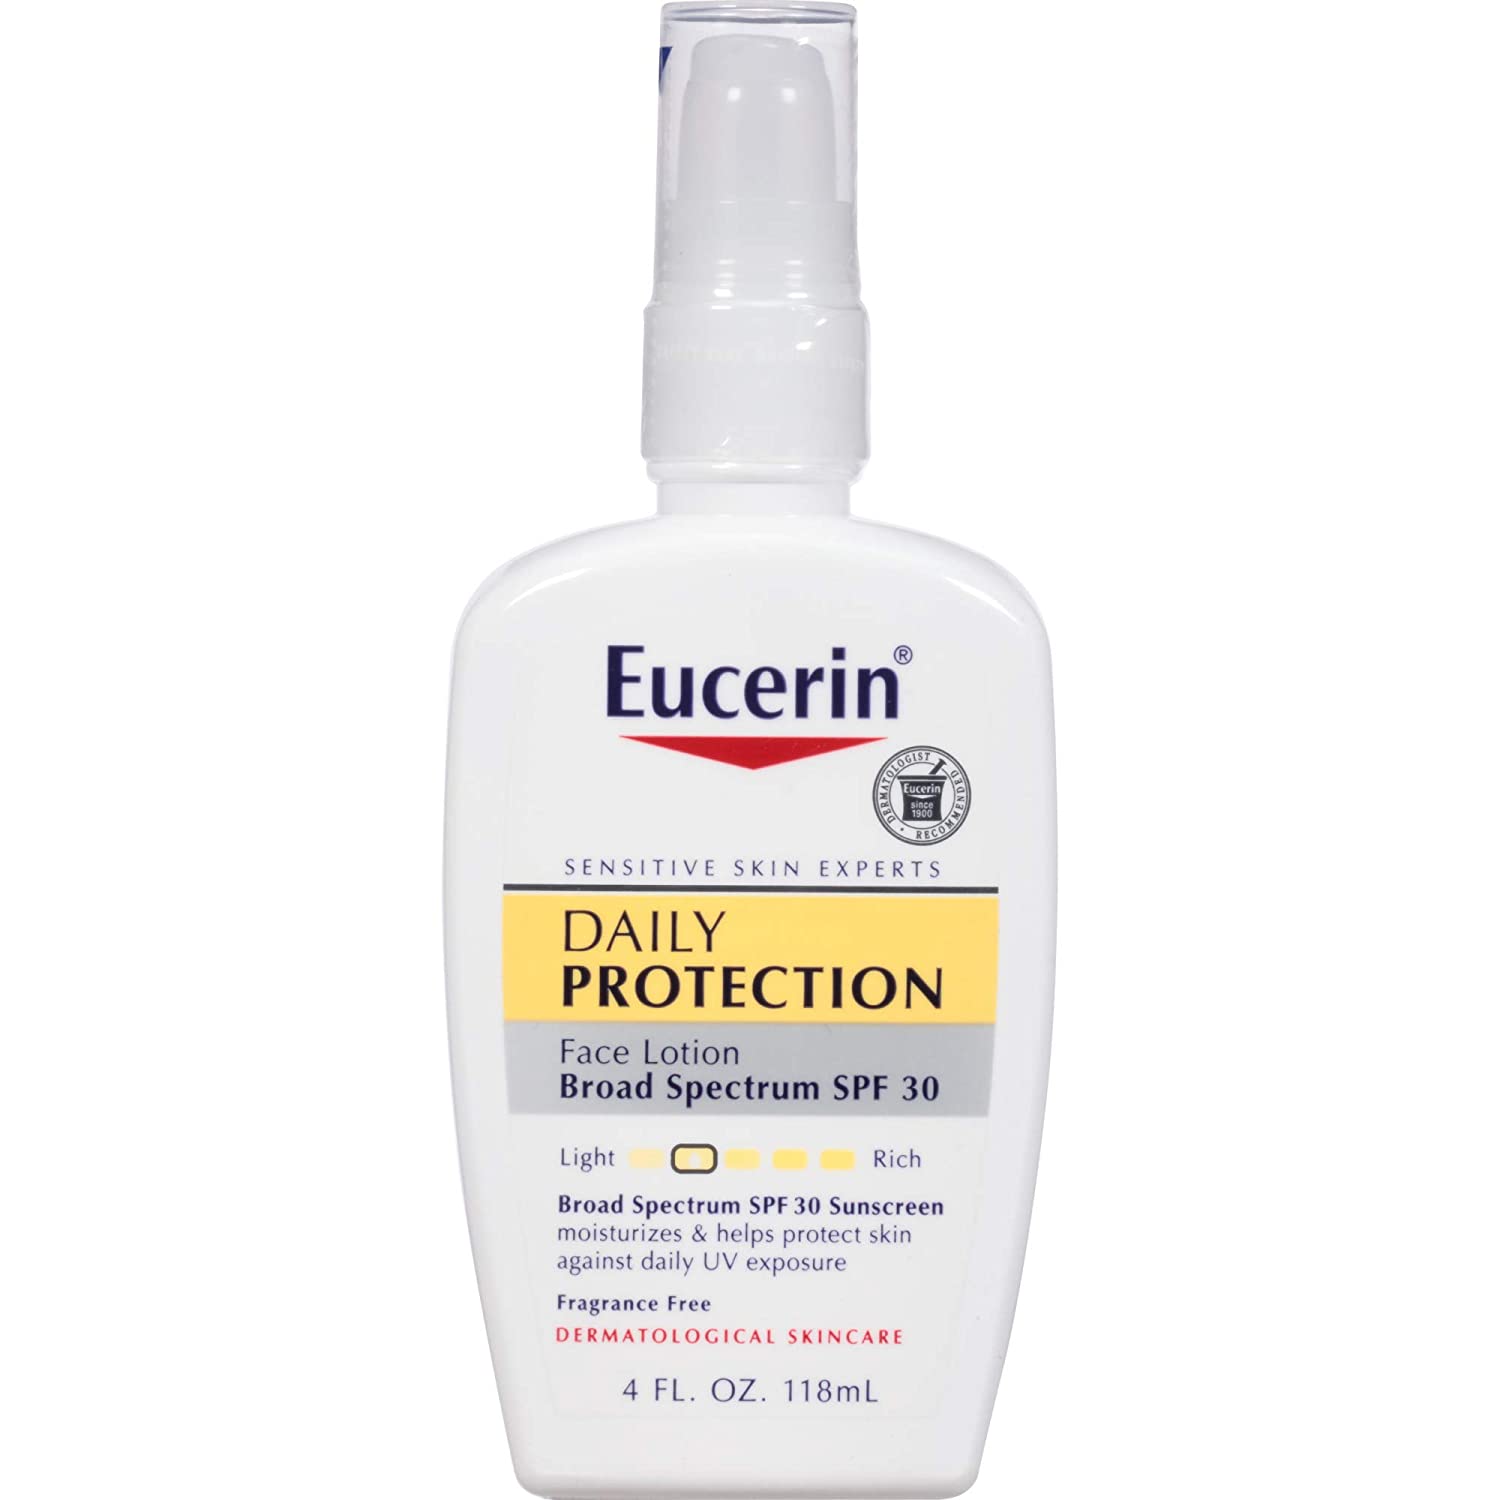 Eucerin Day Protection Face Lotion SPF 30 4 oz